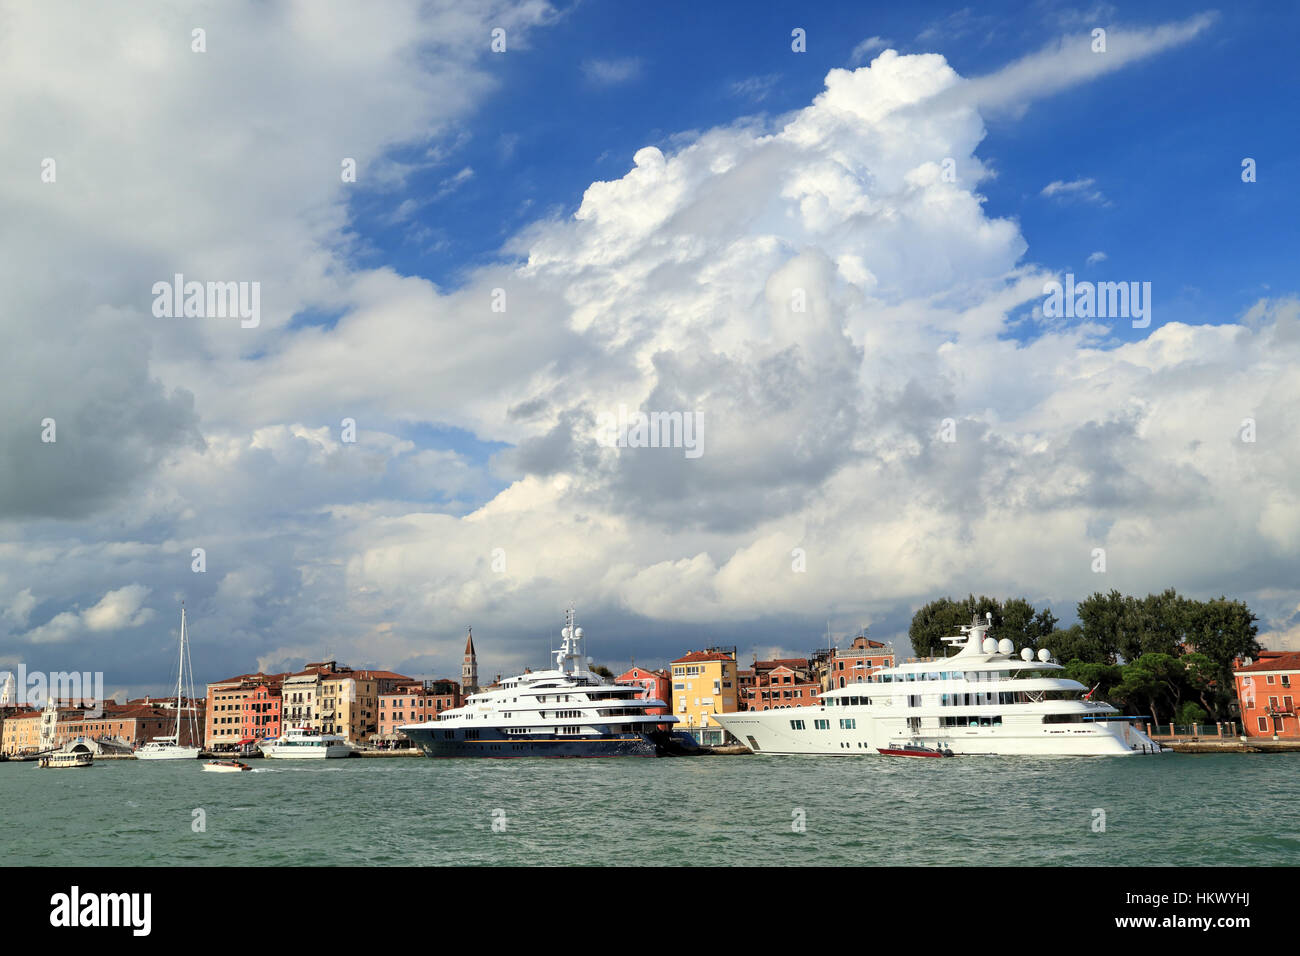 Superyachts Freedom and Lady S (IMO 8975067 and 1008217). Cumulonimbus cloud formation. Stock Photo